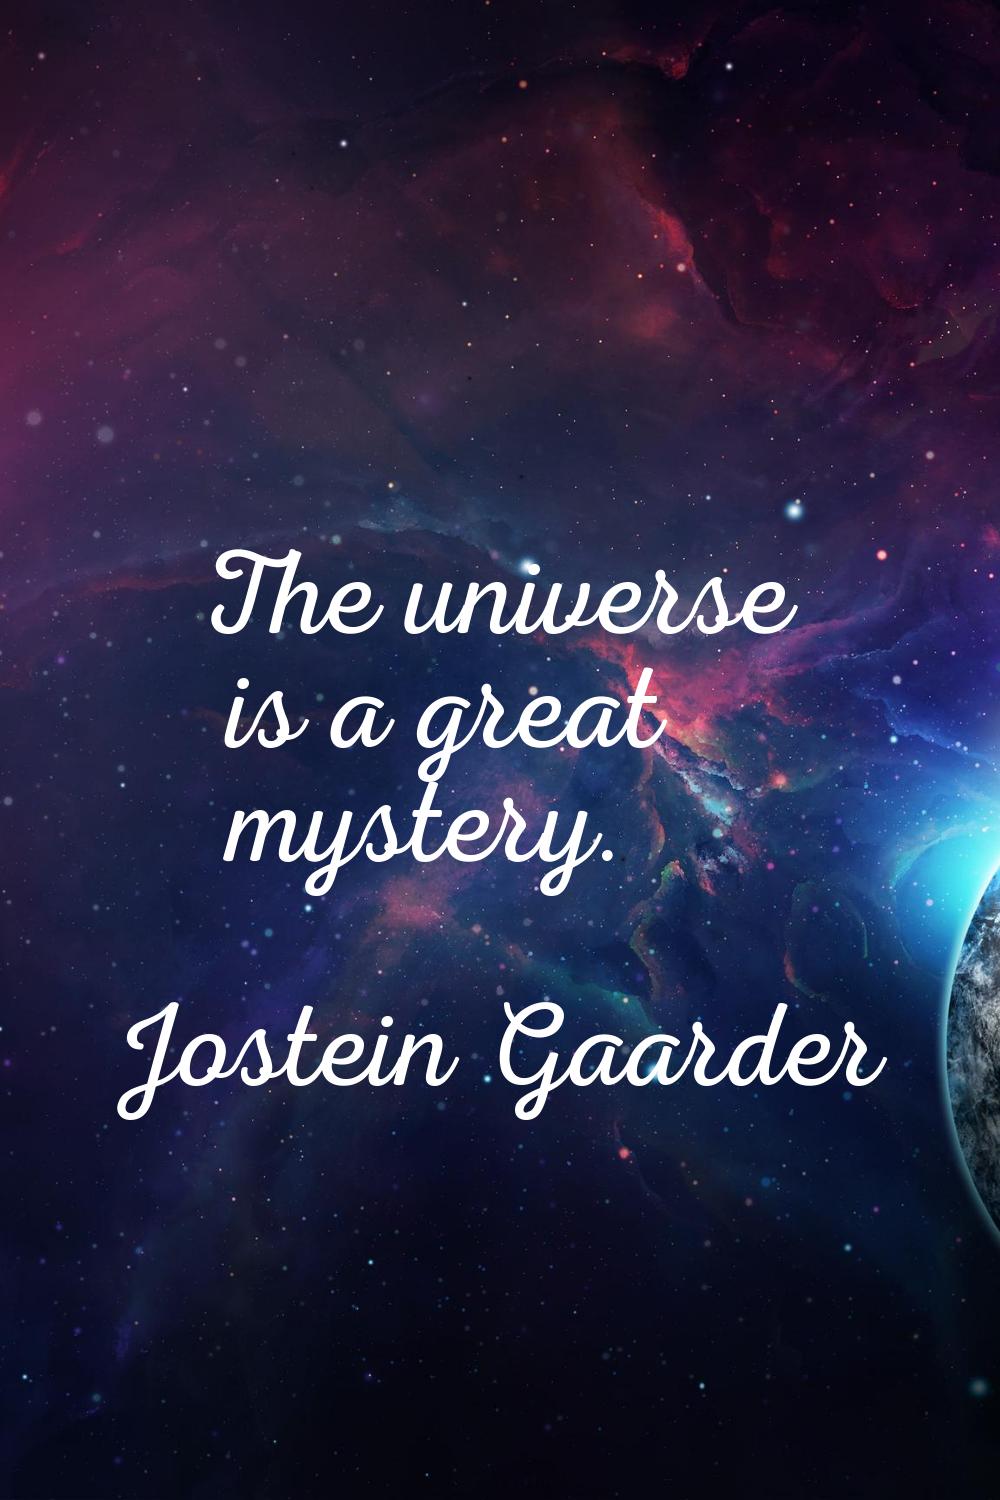 The universe is a great mystery.